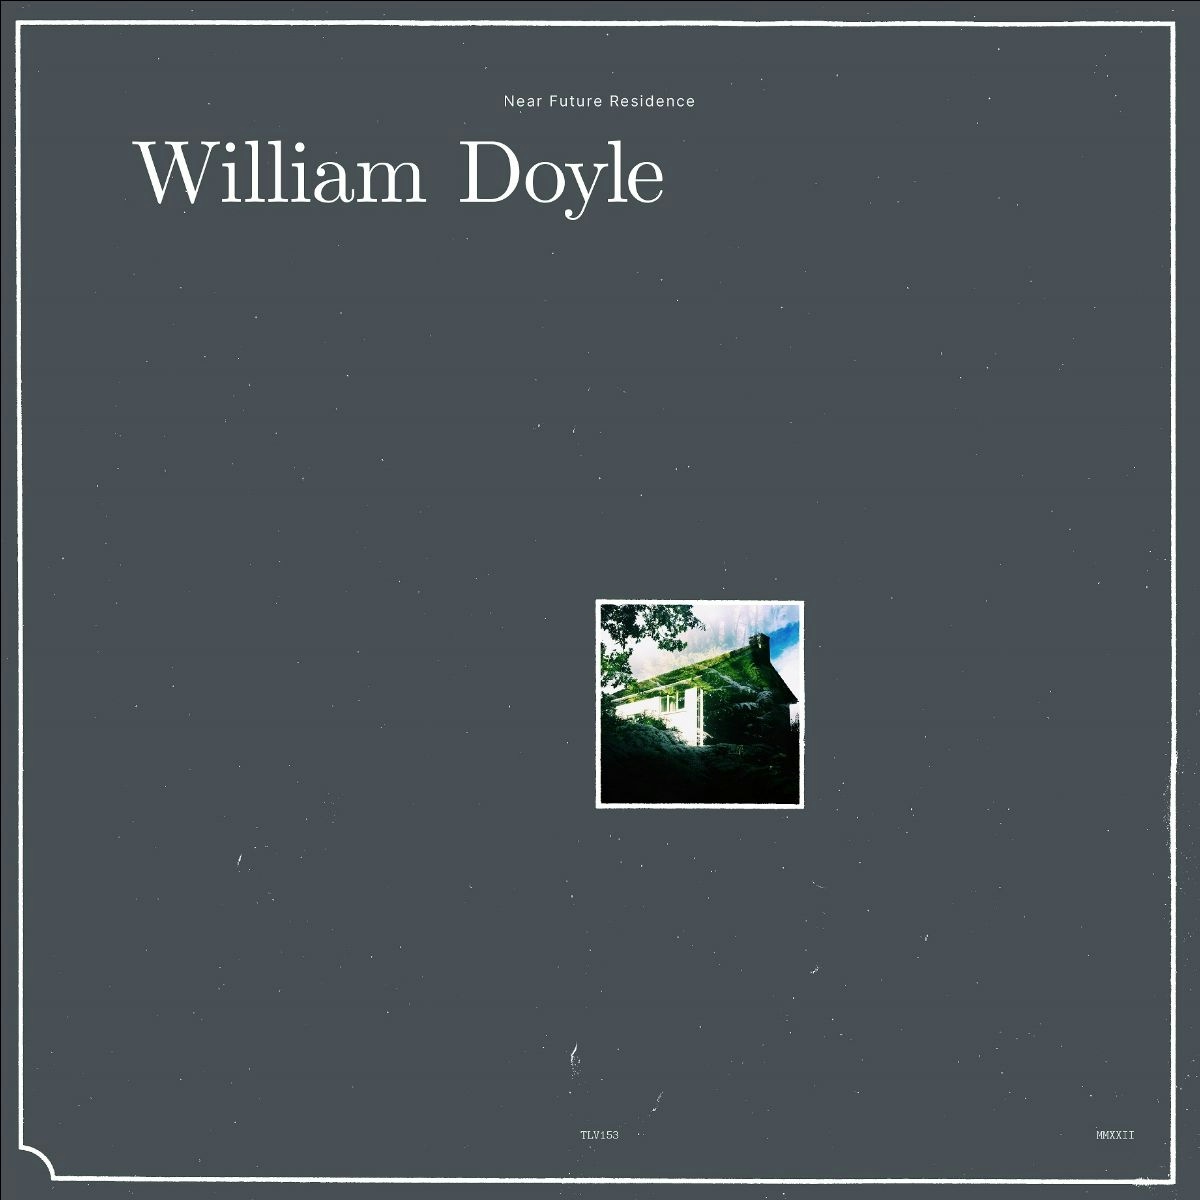 Album artwork for Album artwork for Near Future Residence by William Doyle by Near Future Residence - William Doyle